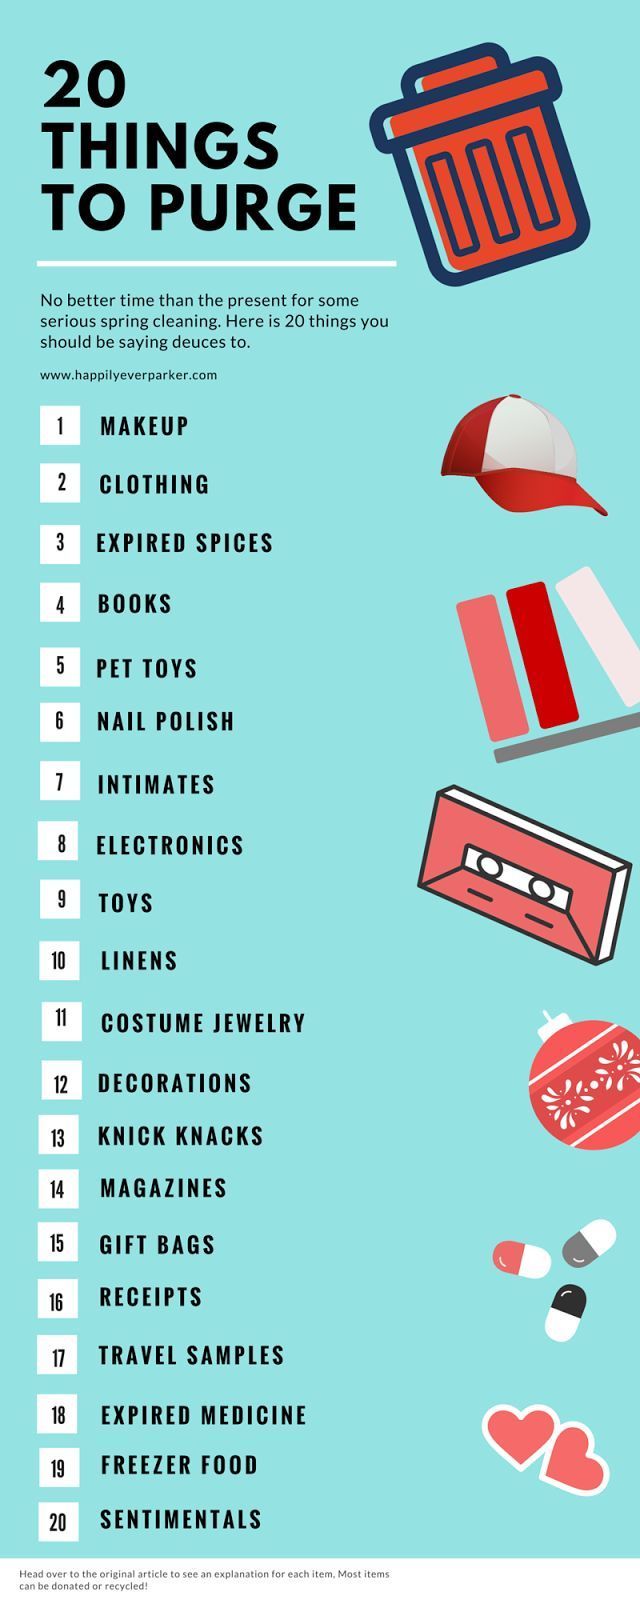 Happily Ever Parker: 20 Things to Purge, organize, organization, cleaning tips, sp